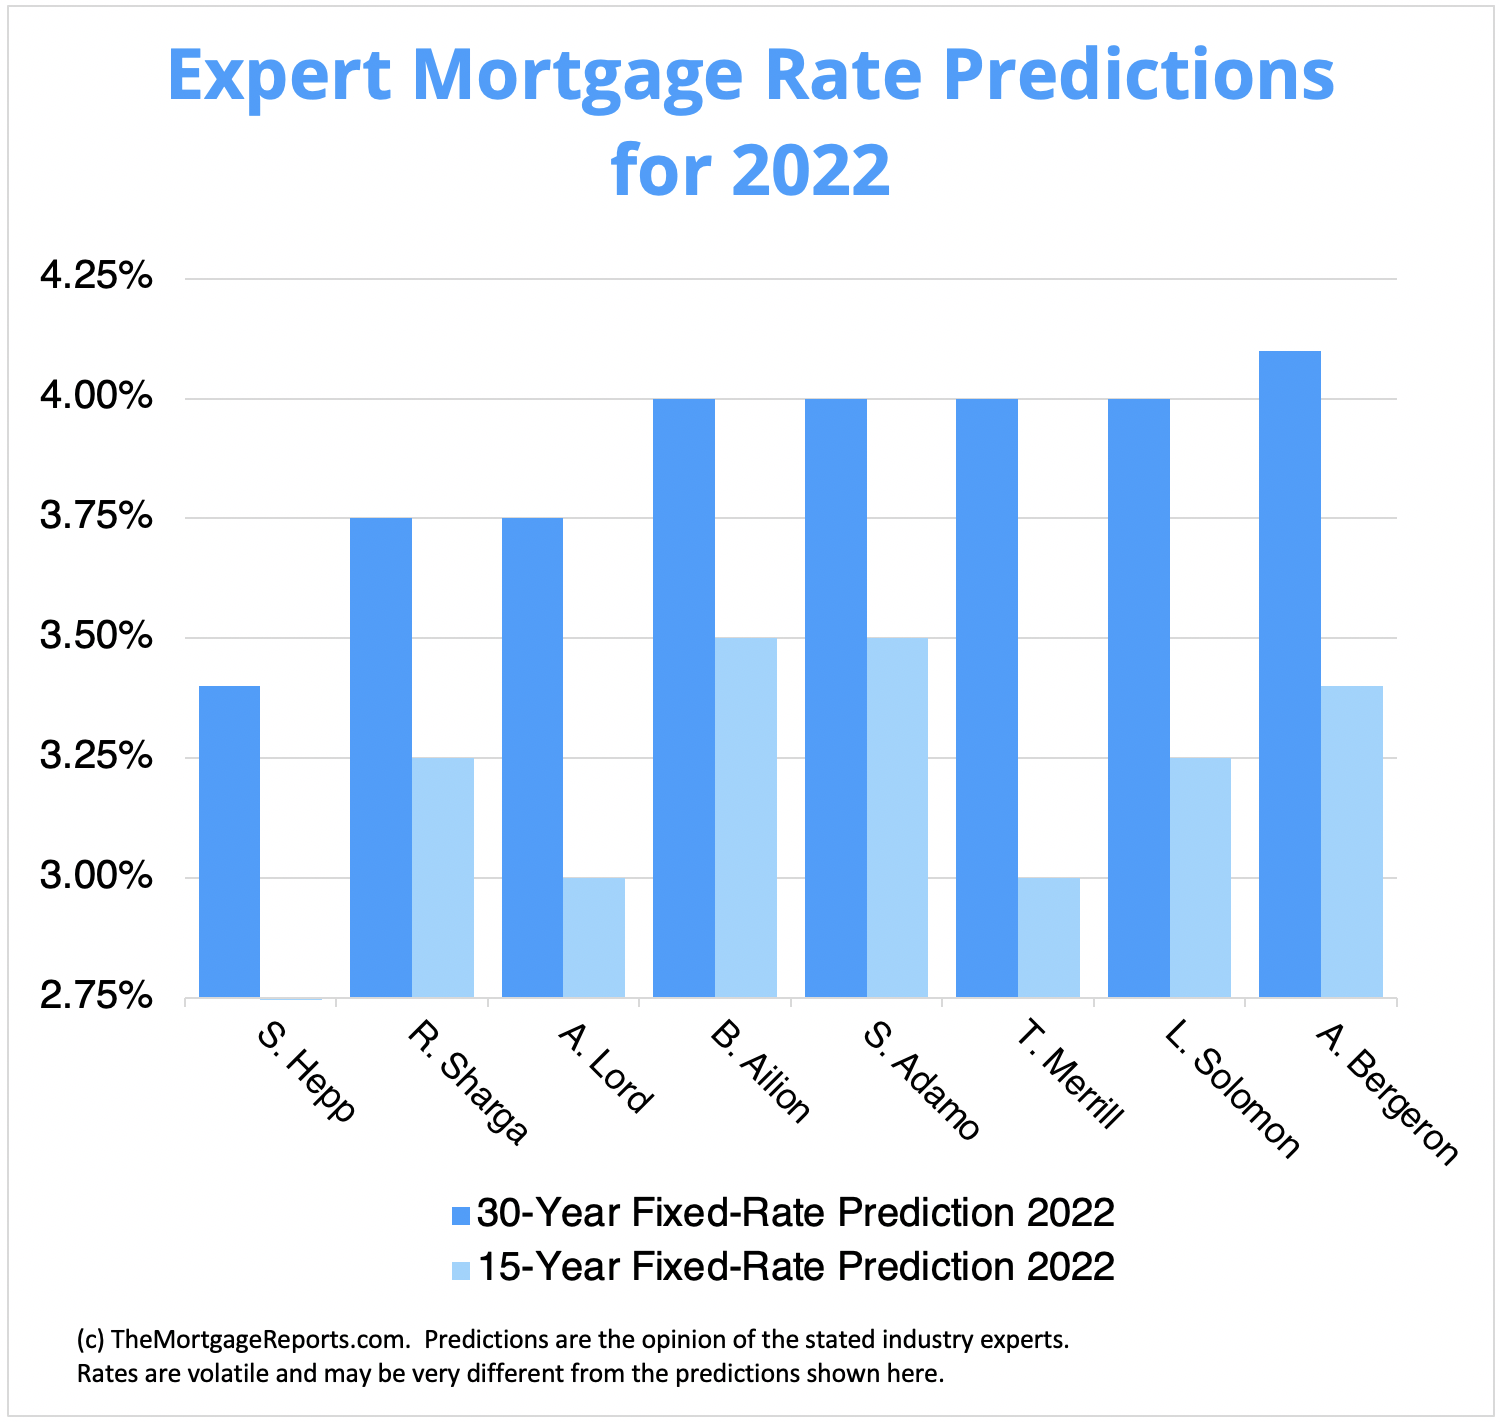 Academy Mortgage Rates Review: Overview, Facts, Features, Plans, Pros and Cons